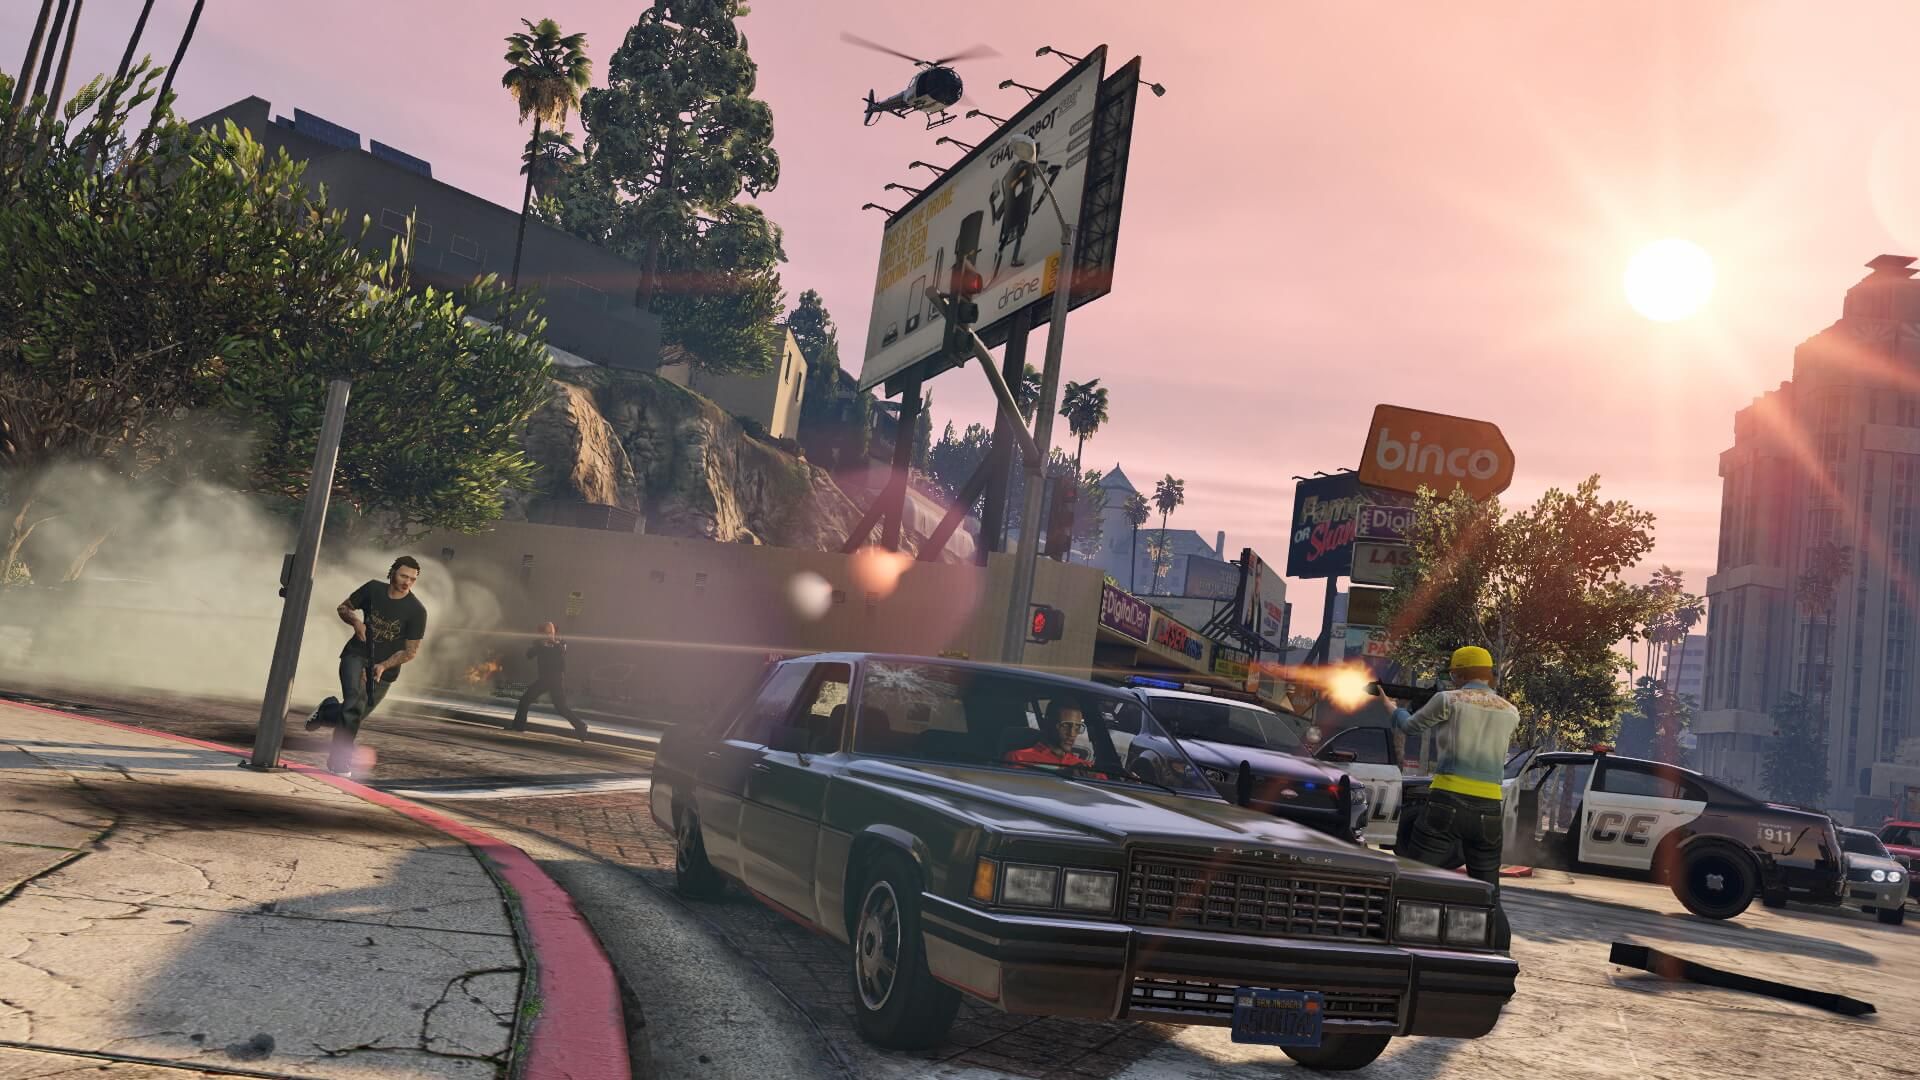 'GTA Online' Players Report Problems Transferring Data to PS4, Xbox One